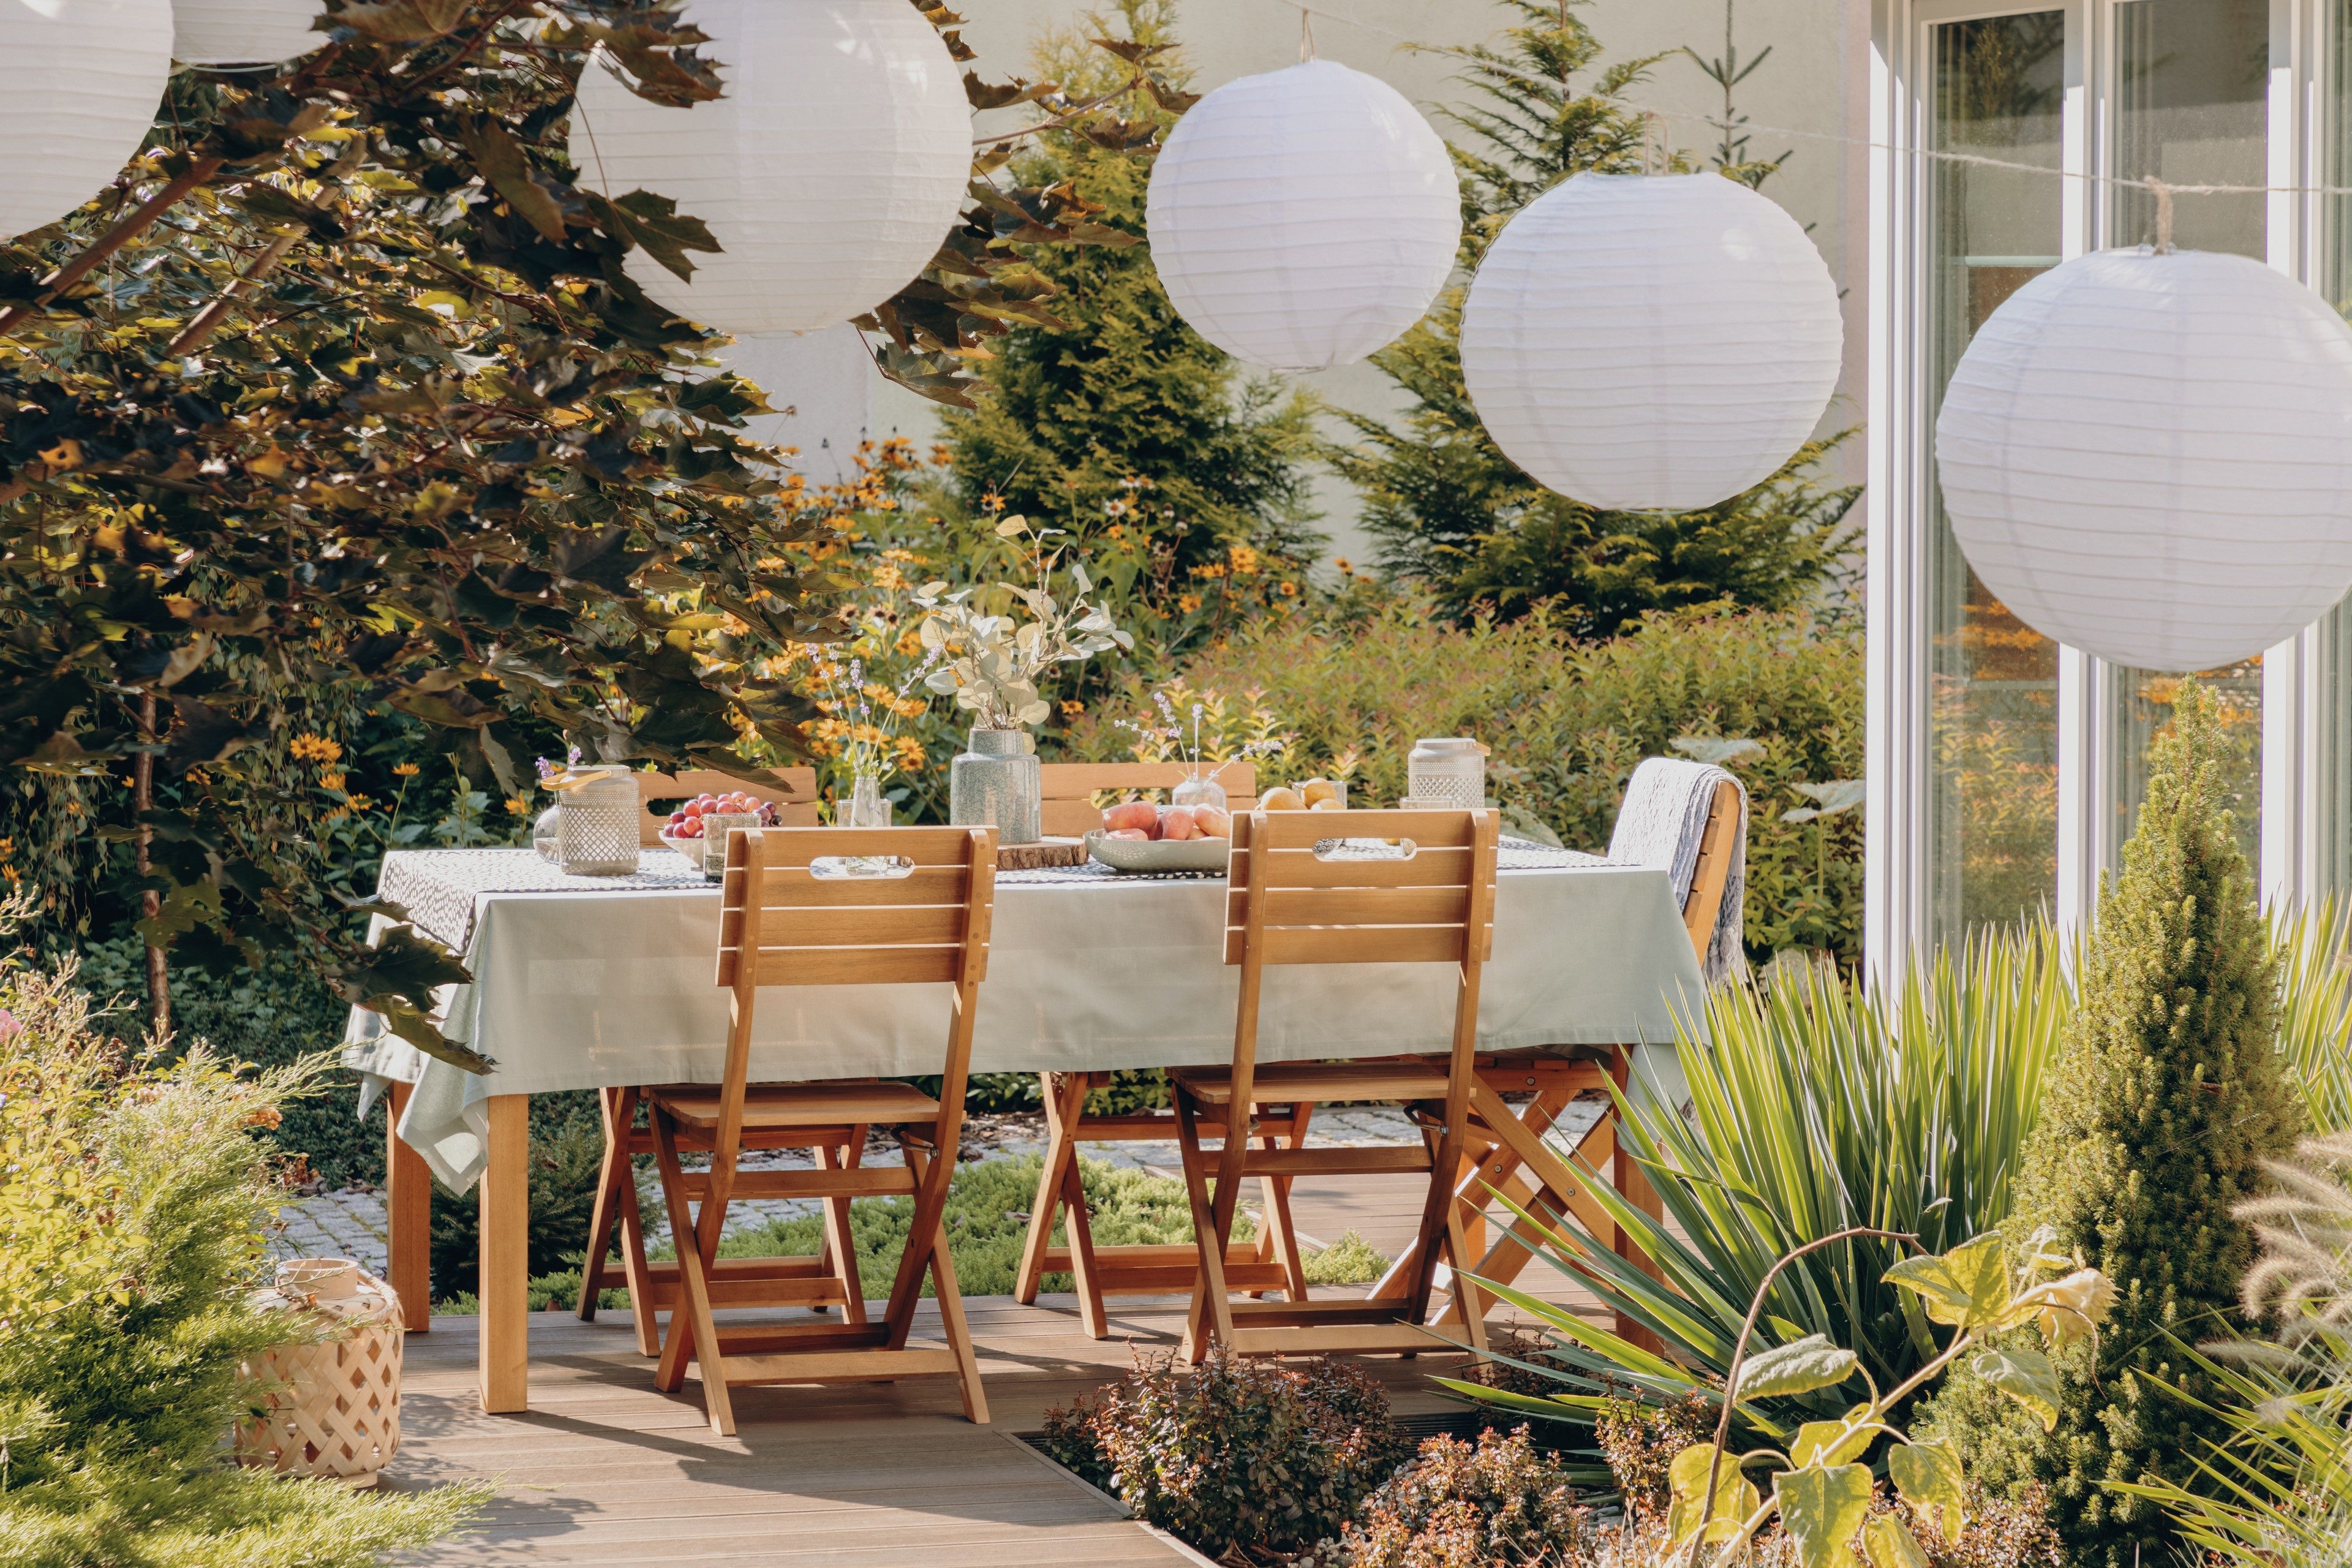 Real photo of round lamps above a table with wooden chairs in a garden